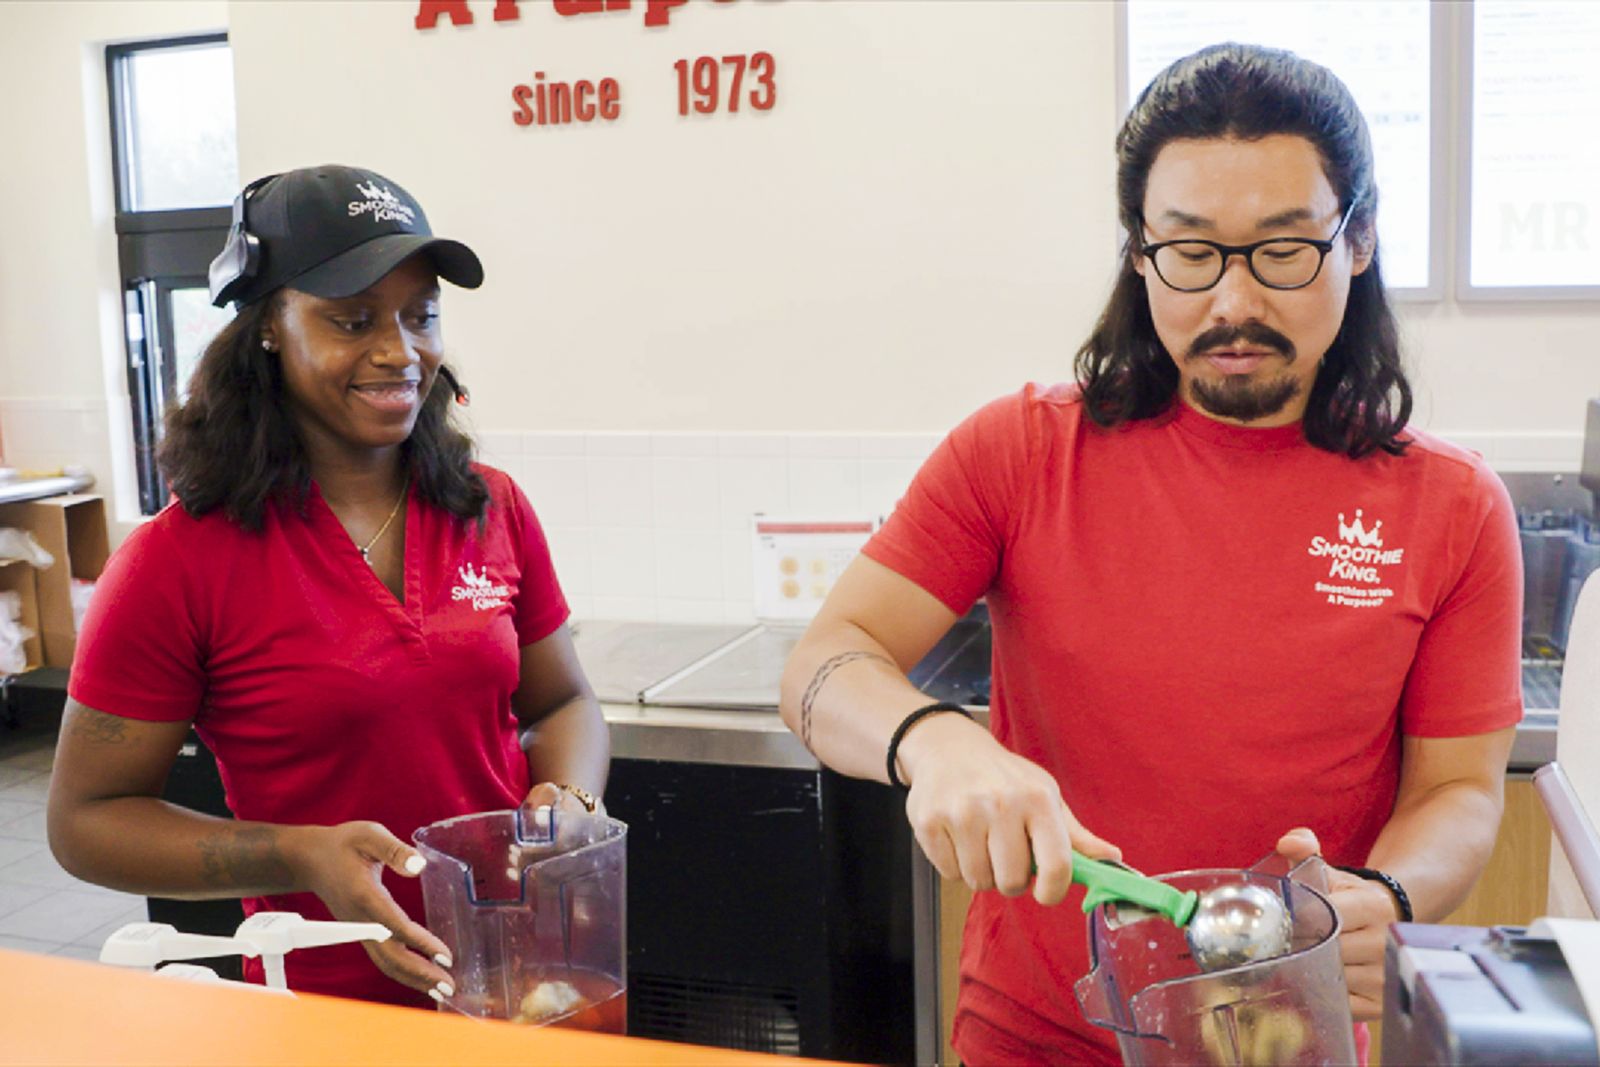 Smoothie King CEO Wan Kim to Be Featured on CBS' Undercover Boss